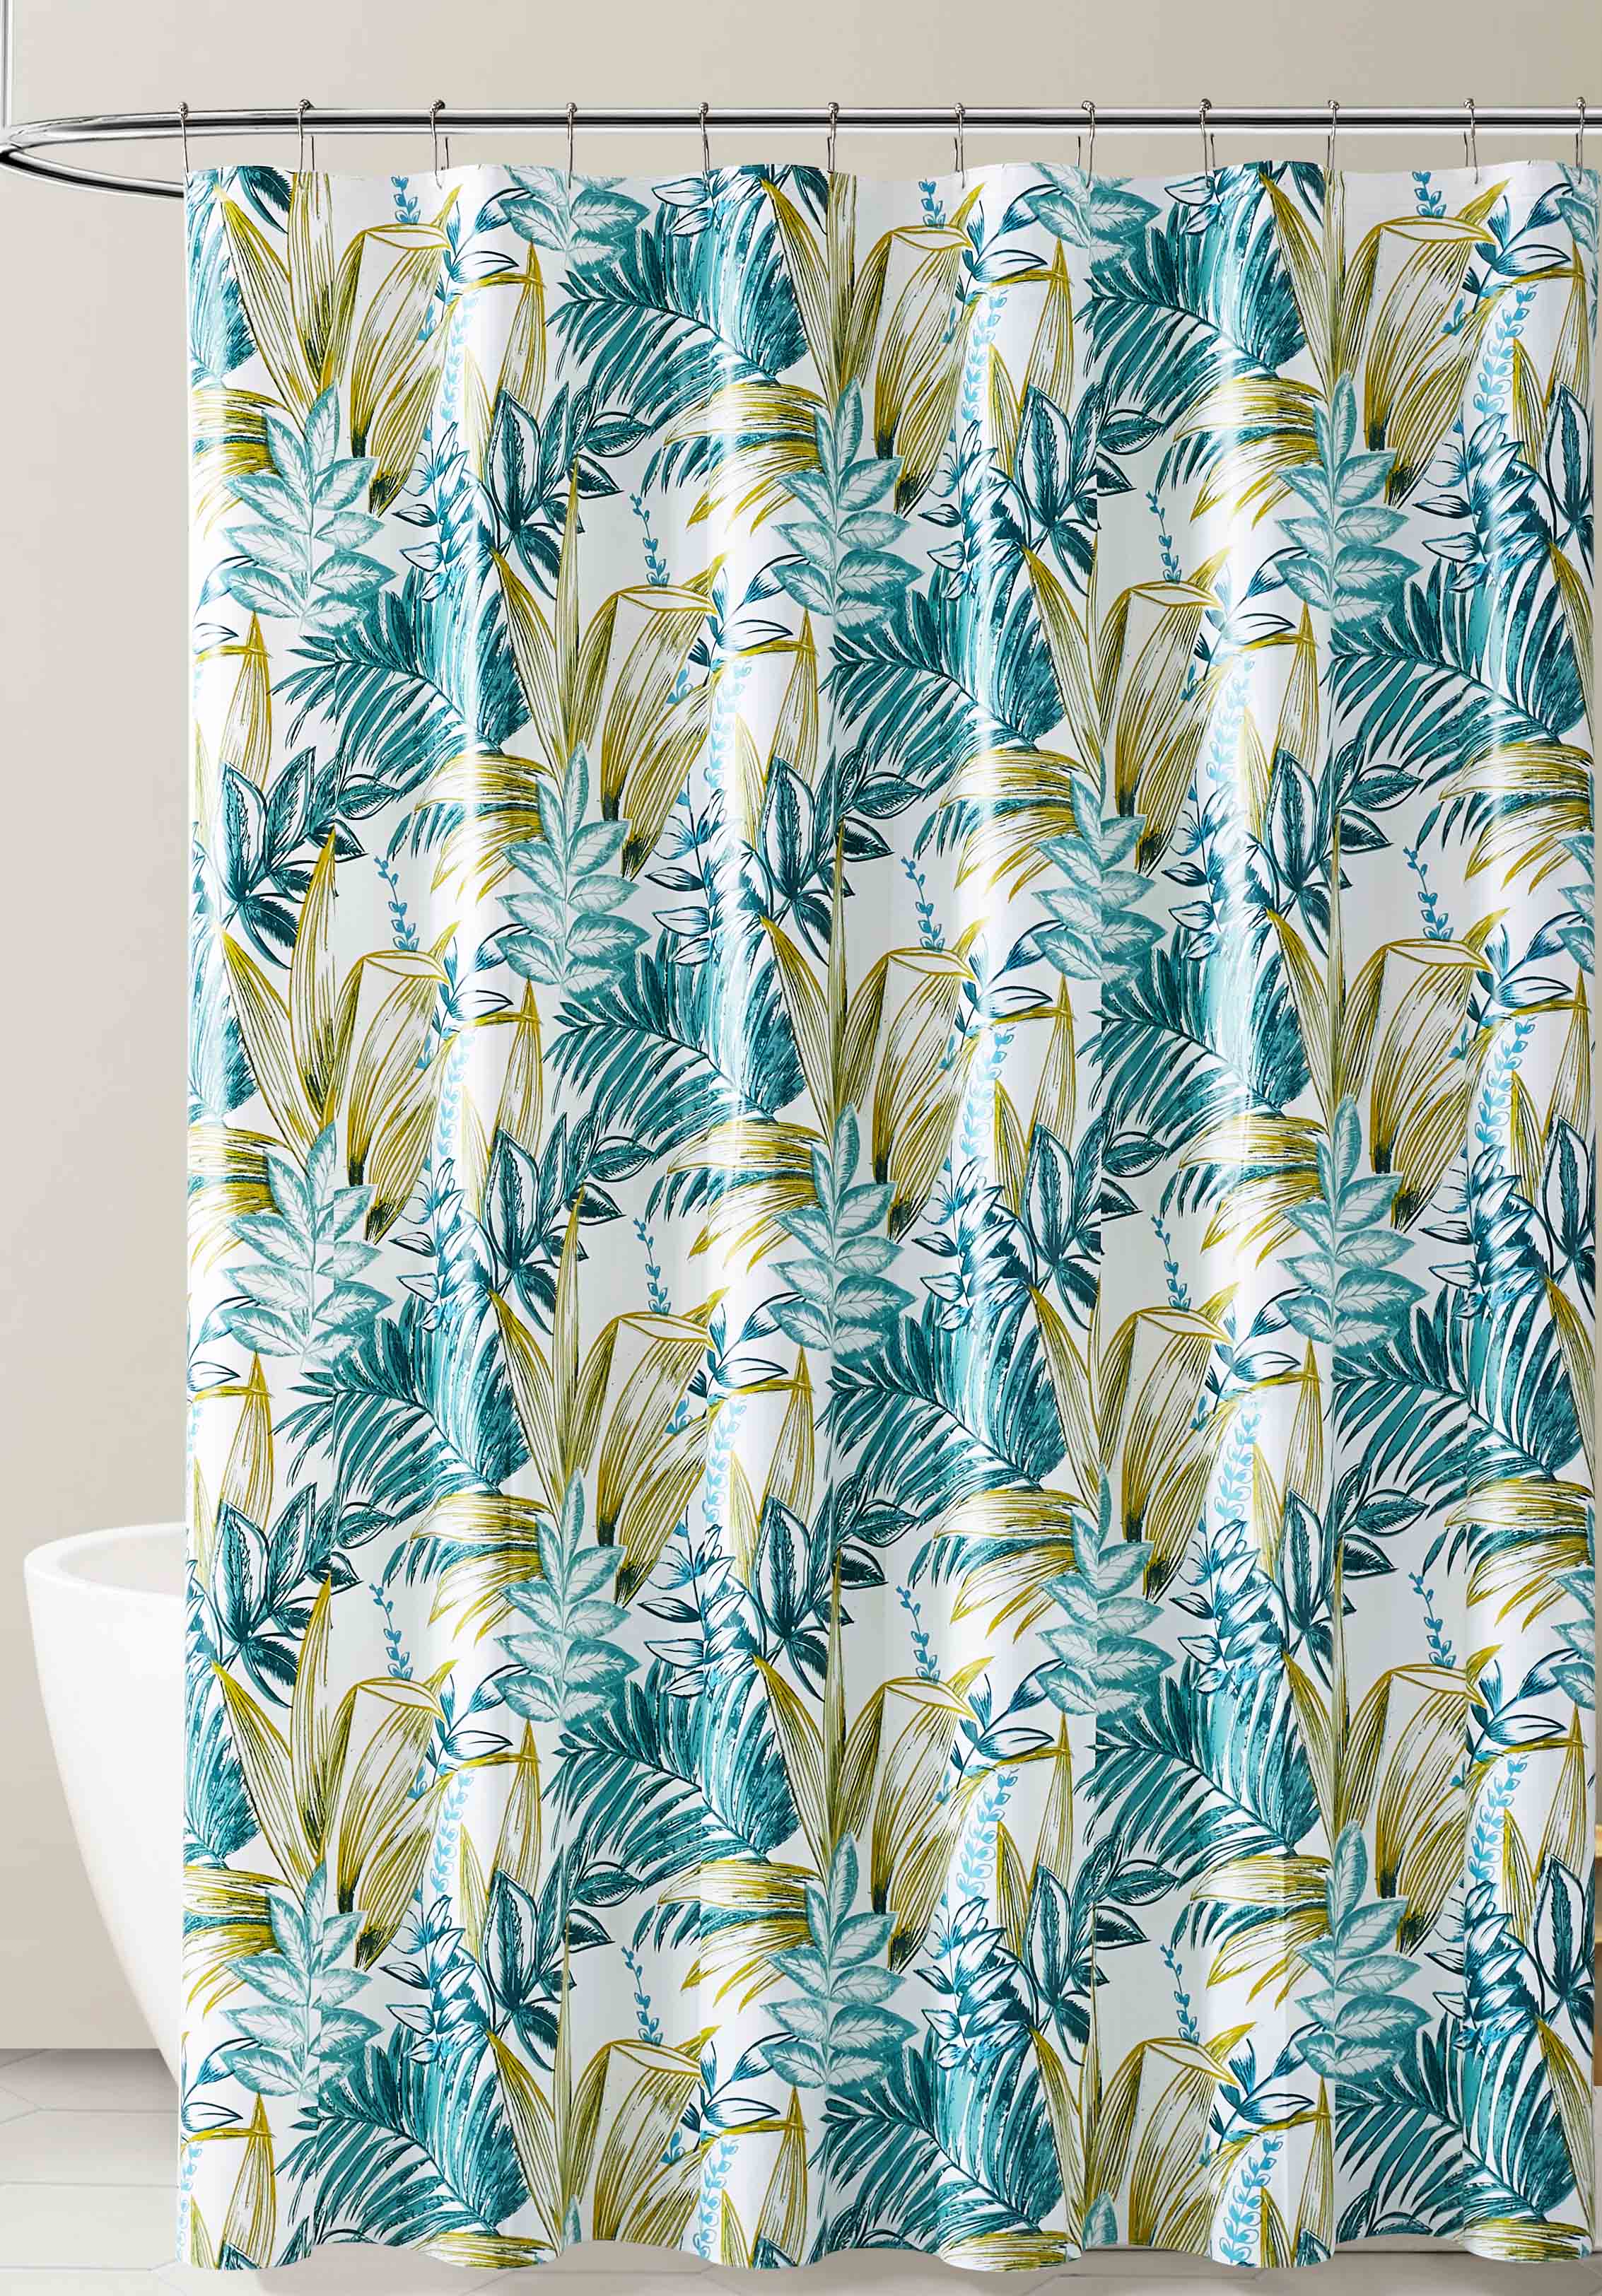 Teal White and Gold Tropical Leaf Design PEVA Shower Curtain Liner Odorless, PVC and Chlorine Free, Biodegradable, Mildew Free, Eco-Friendly Size 72in x 72inTeal White and Gold